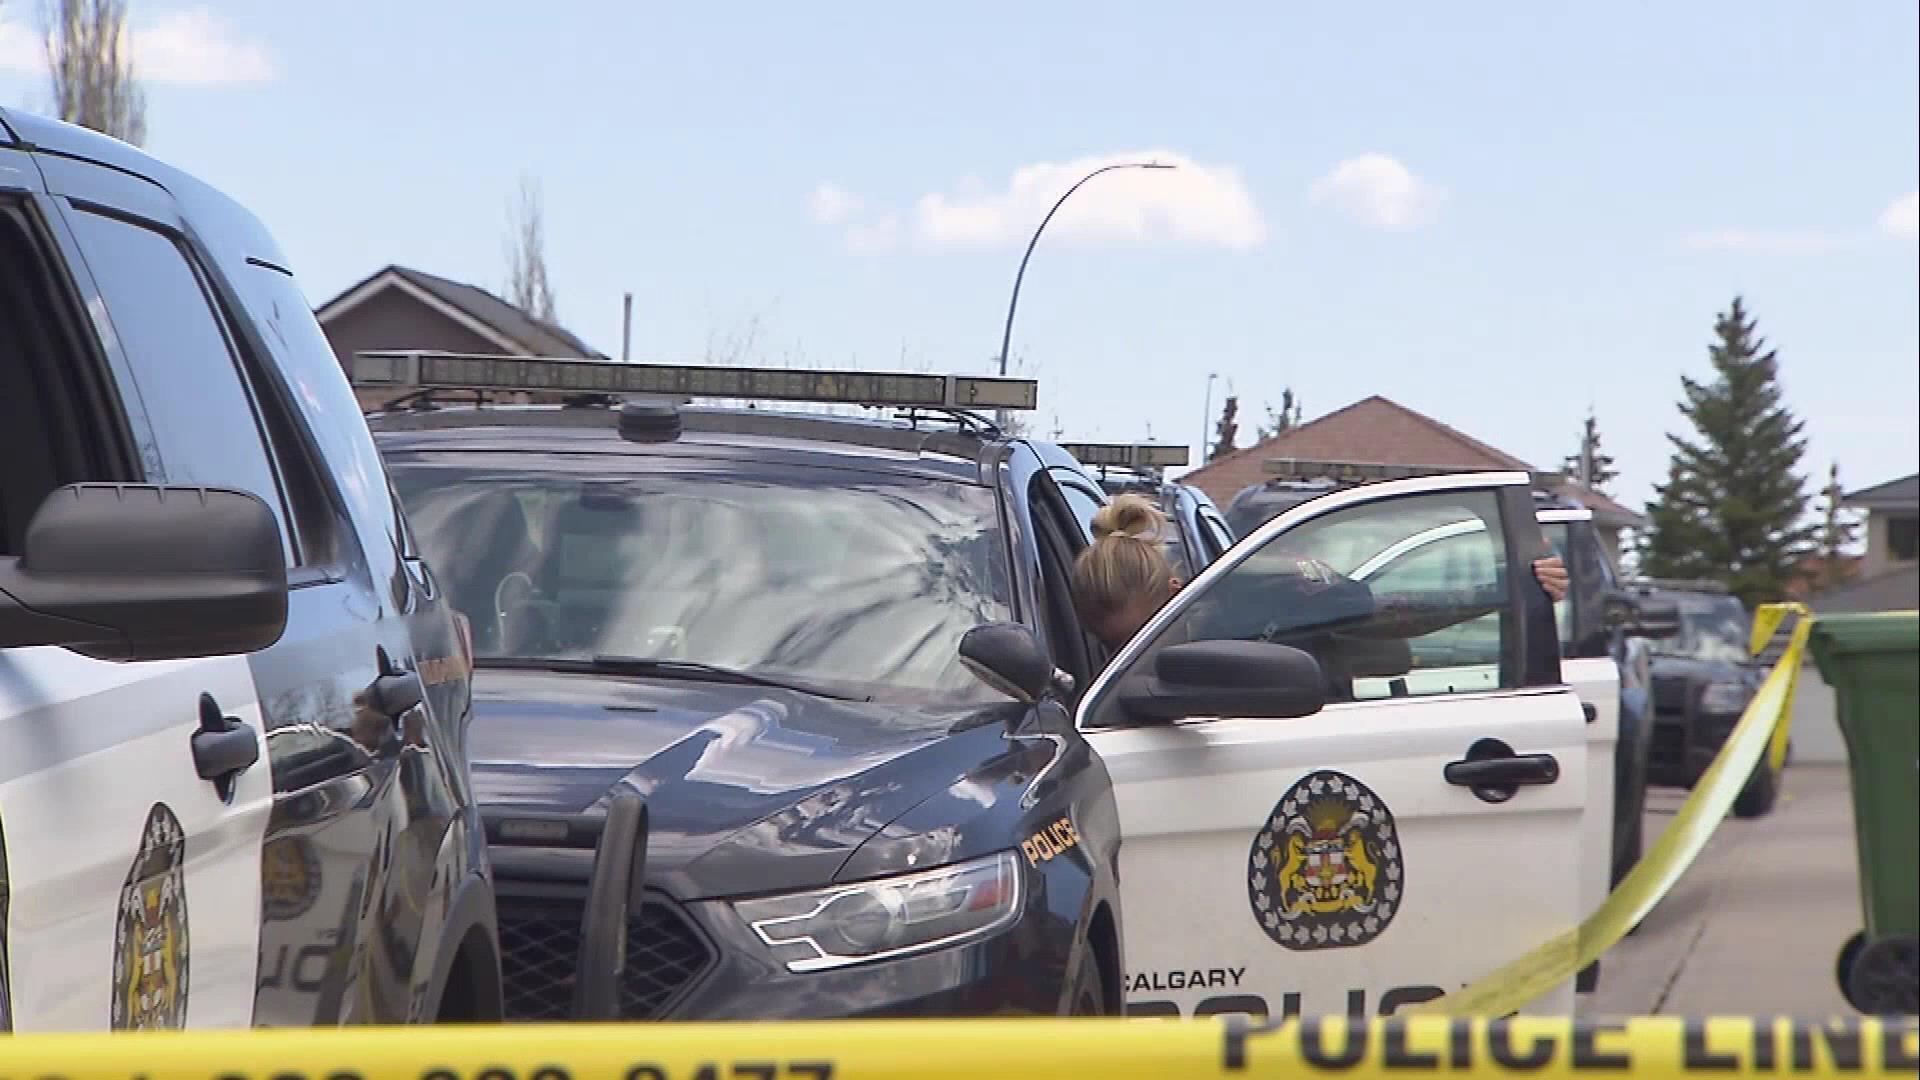 Suspect in custody after shooting at Calgary Police